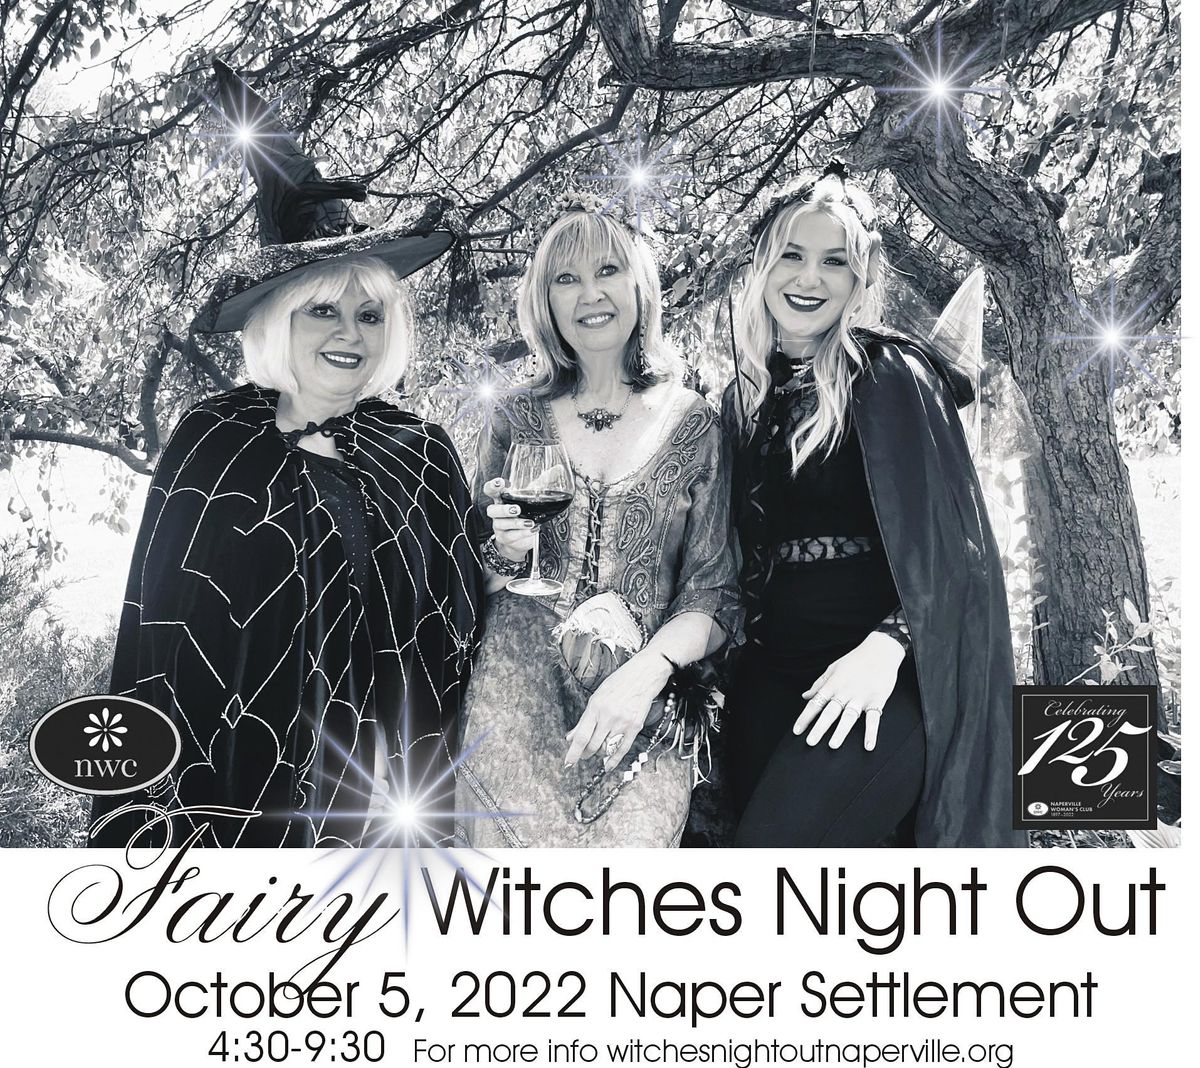 Naperville Witches Night Out 2022, Naper Settlement, Naperville, 5